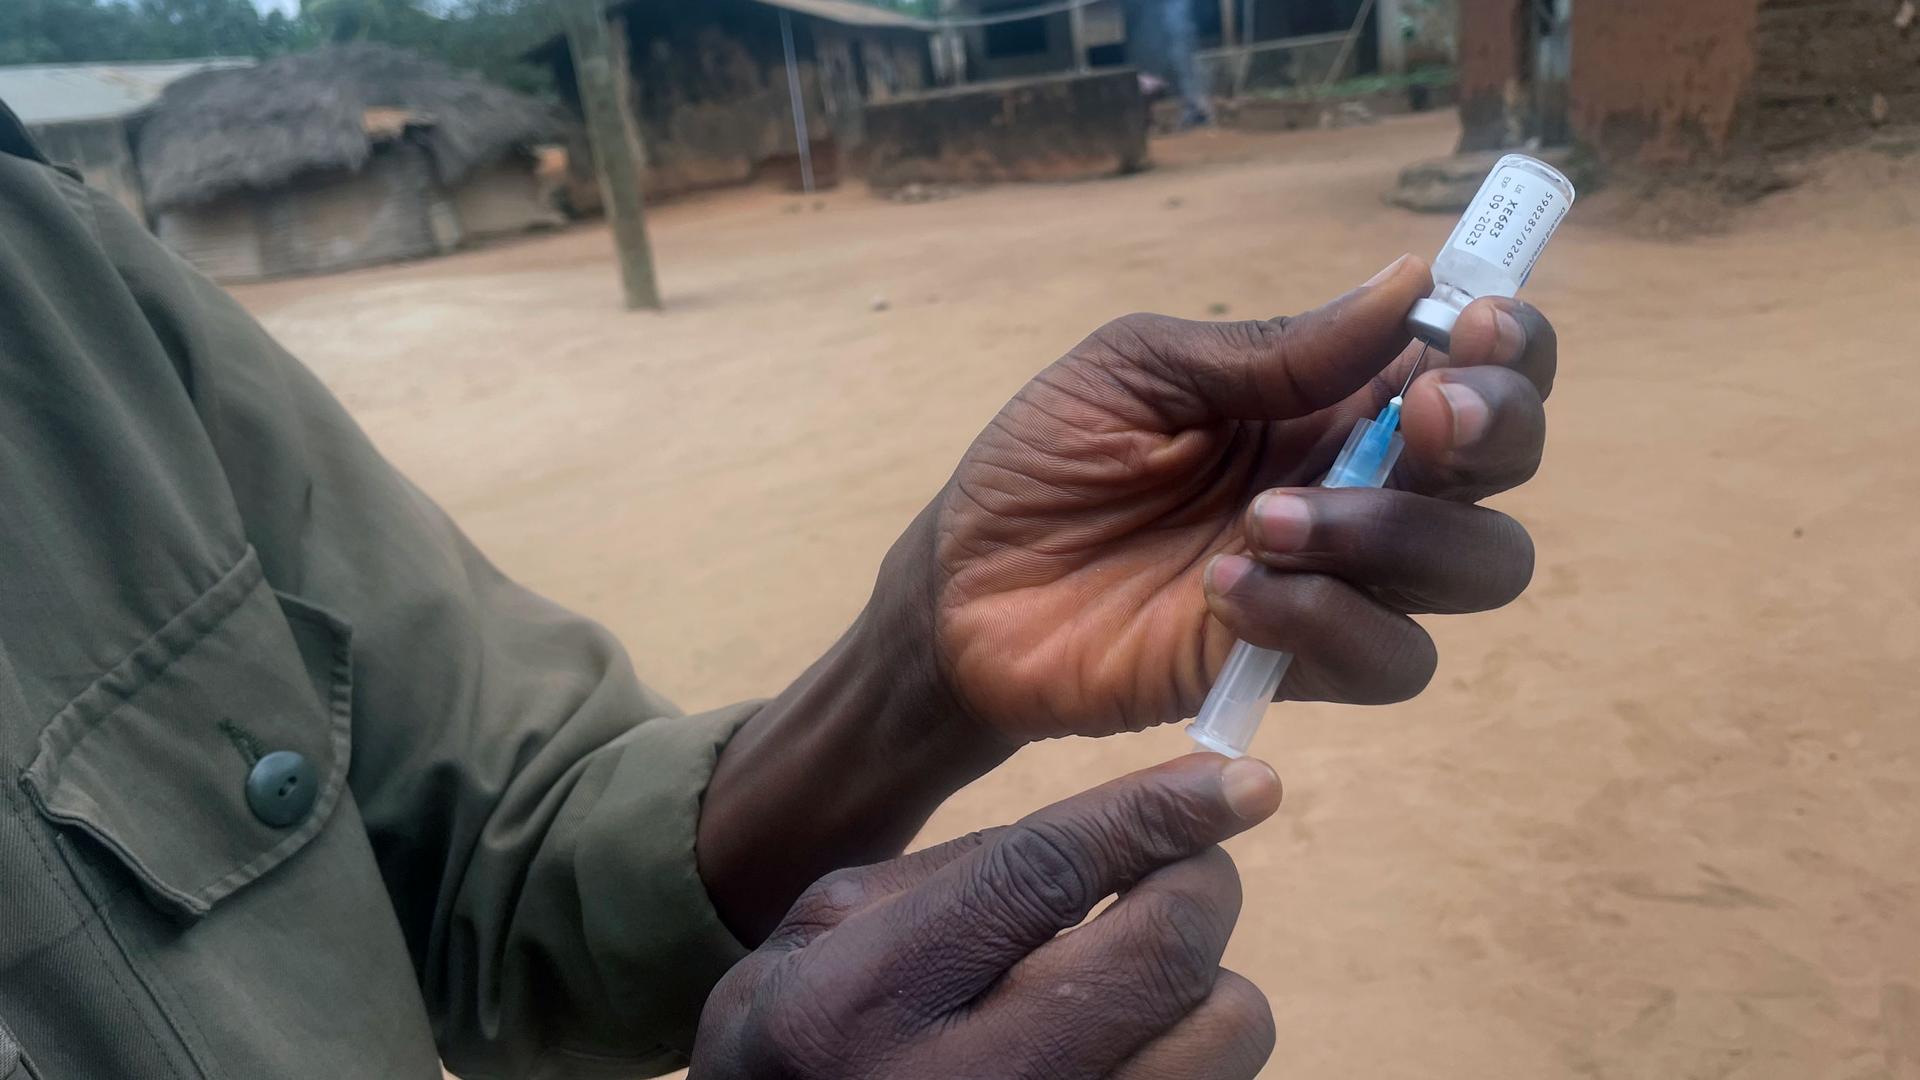 As vaccination levels drop in Ghana, the threat of a measles outbreak looms.